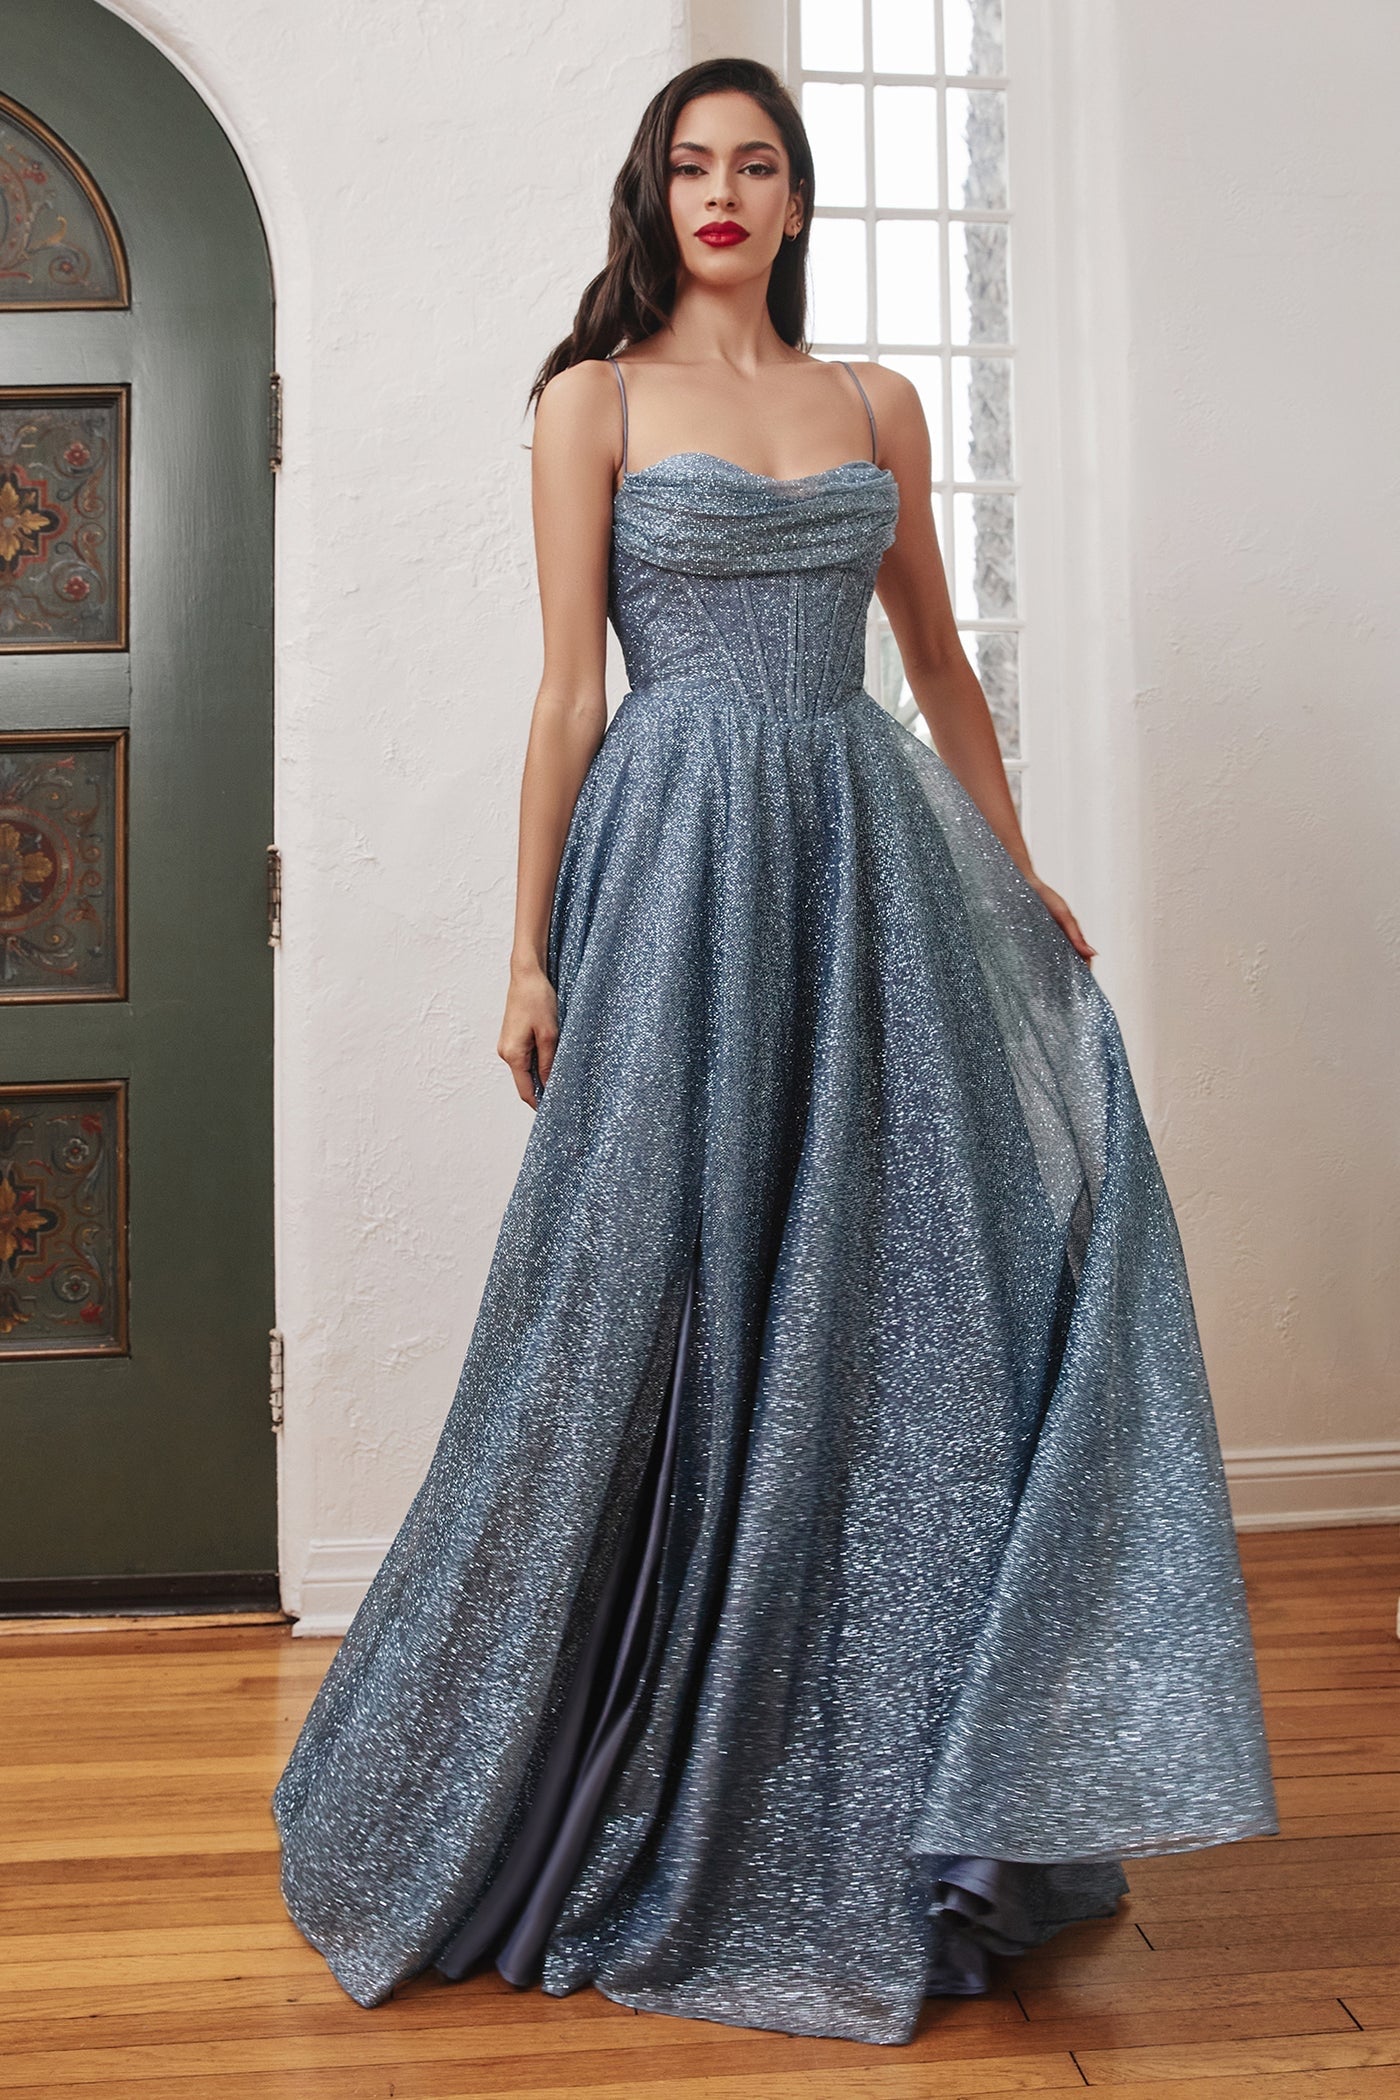 ball gown with a glittering bodice, elegant pleated neckline and a leg slit